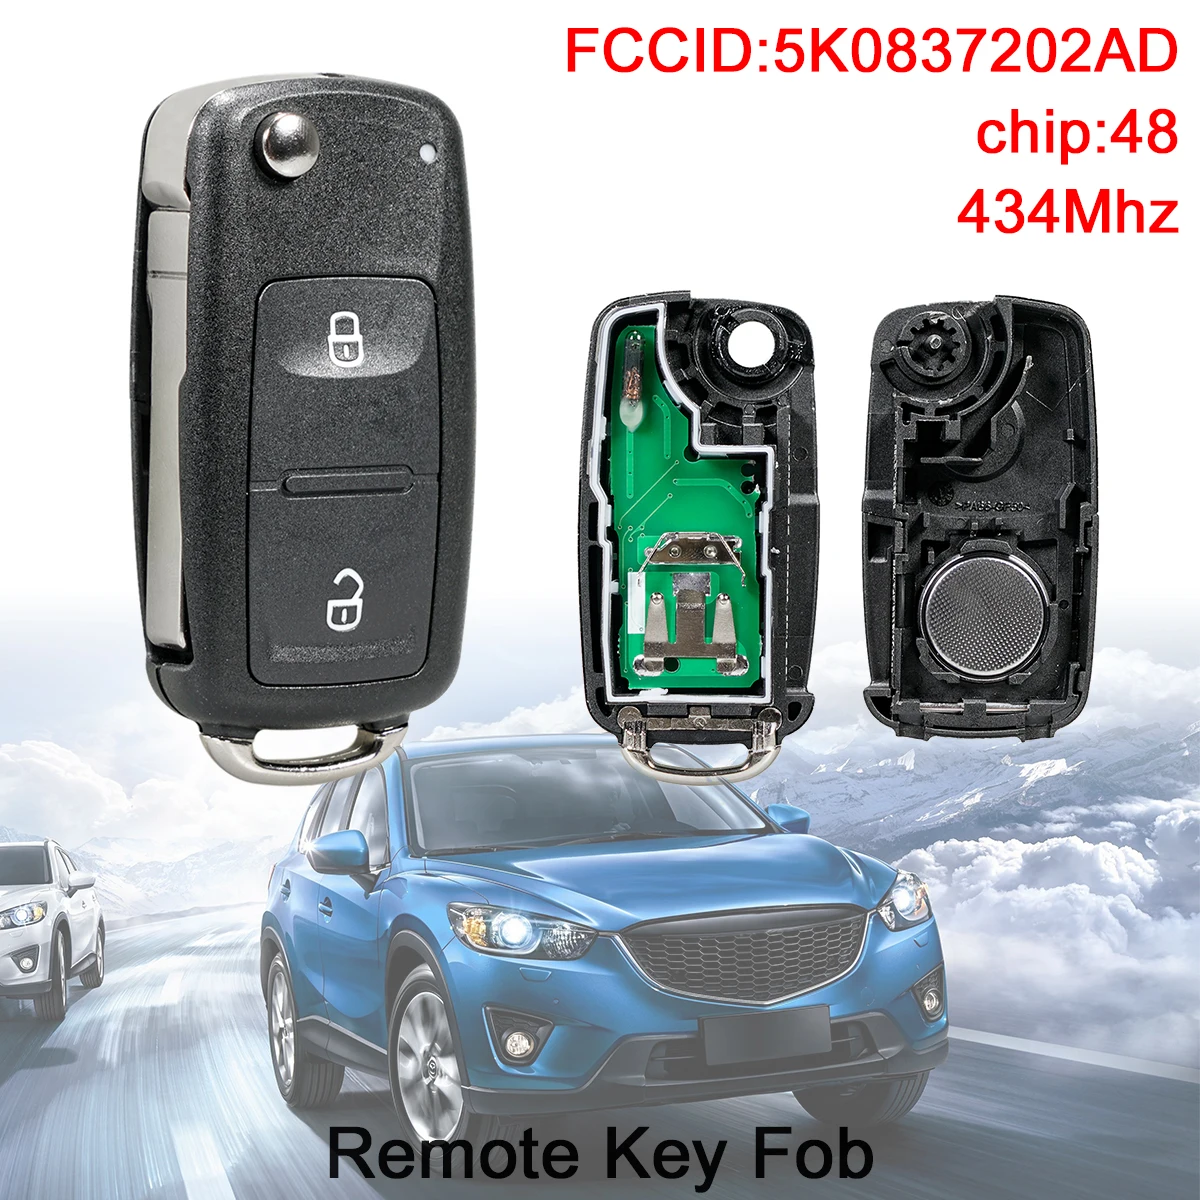 2 Buttons 433MHz  Keyless Smart Remote Car Key Fob with ID48 Chip5K0837202AD Fit for Volkswagen VW  Transporter 2011-2016 jingyuqin remote car key case shell with id48 chip for vw volkswagen polo golf seat ibiza leon skoda octavia 0 buttons fob